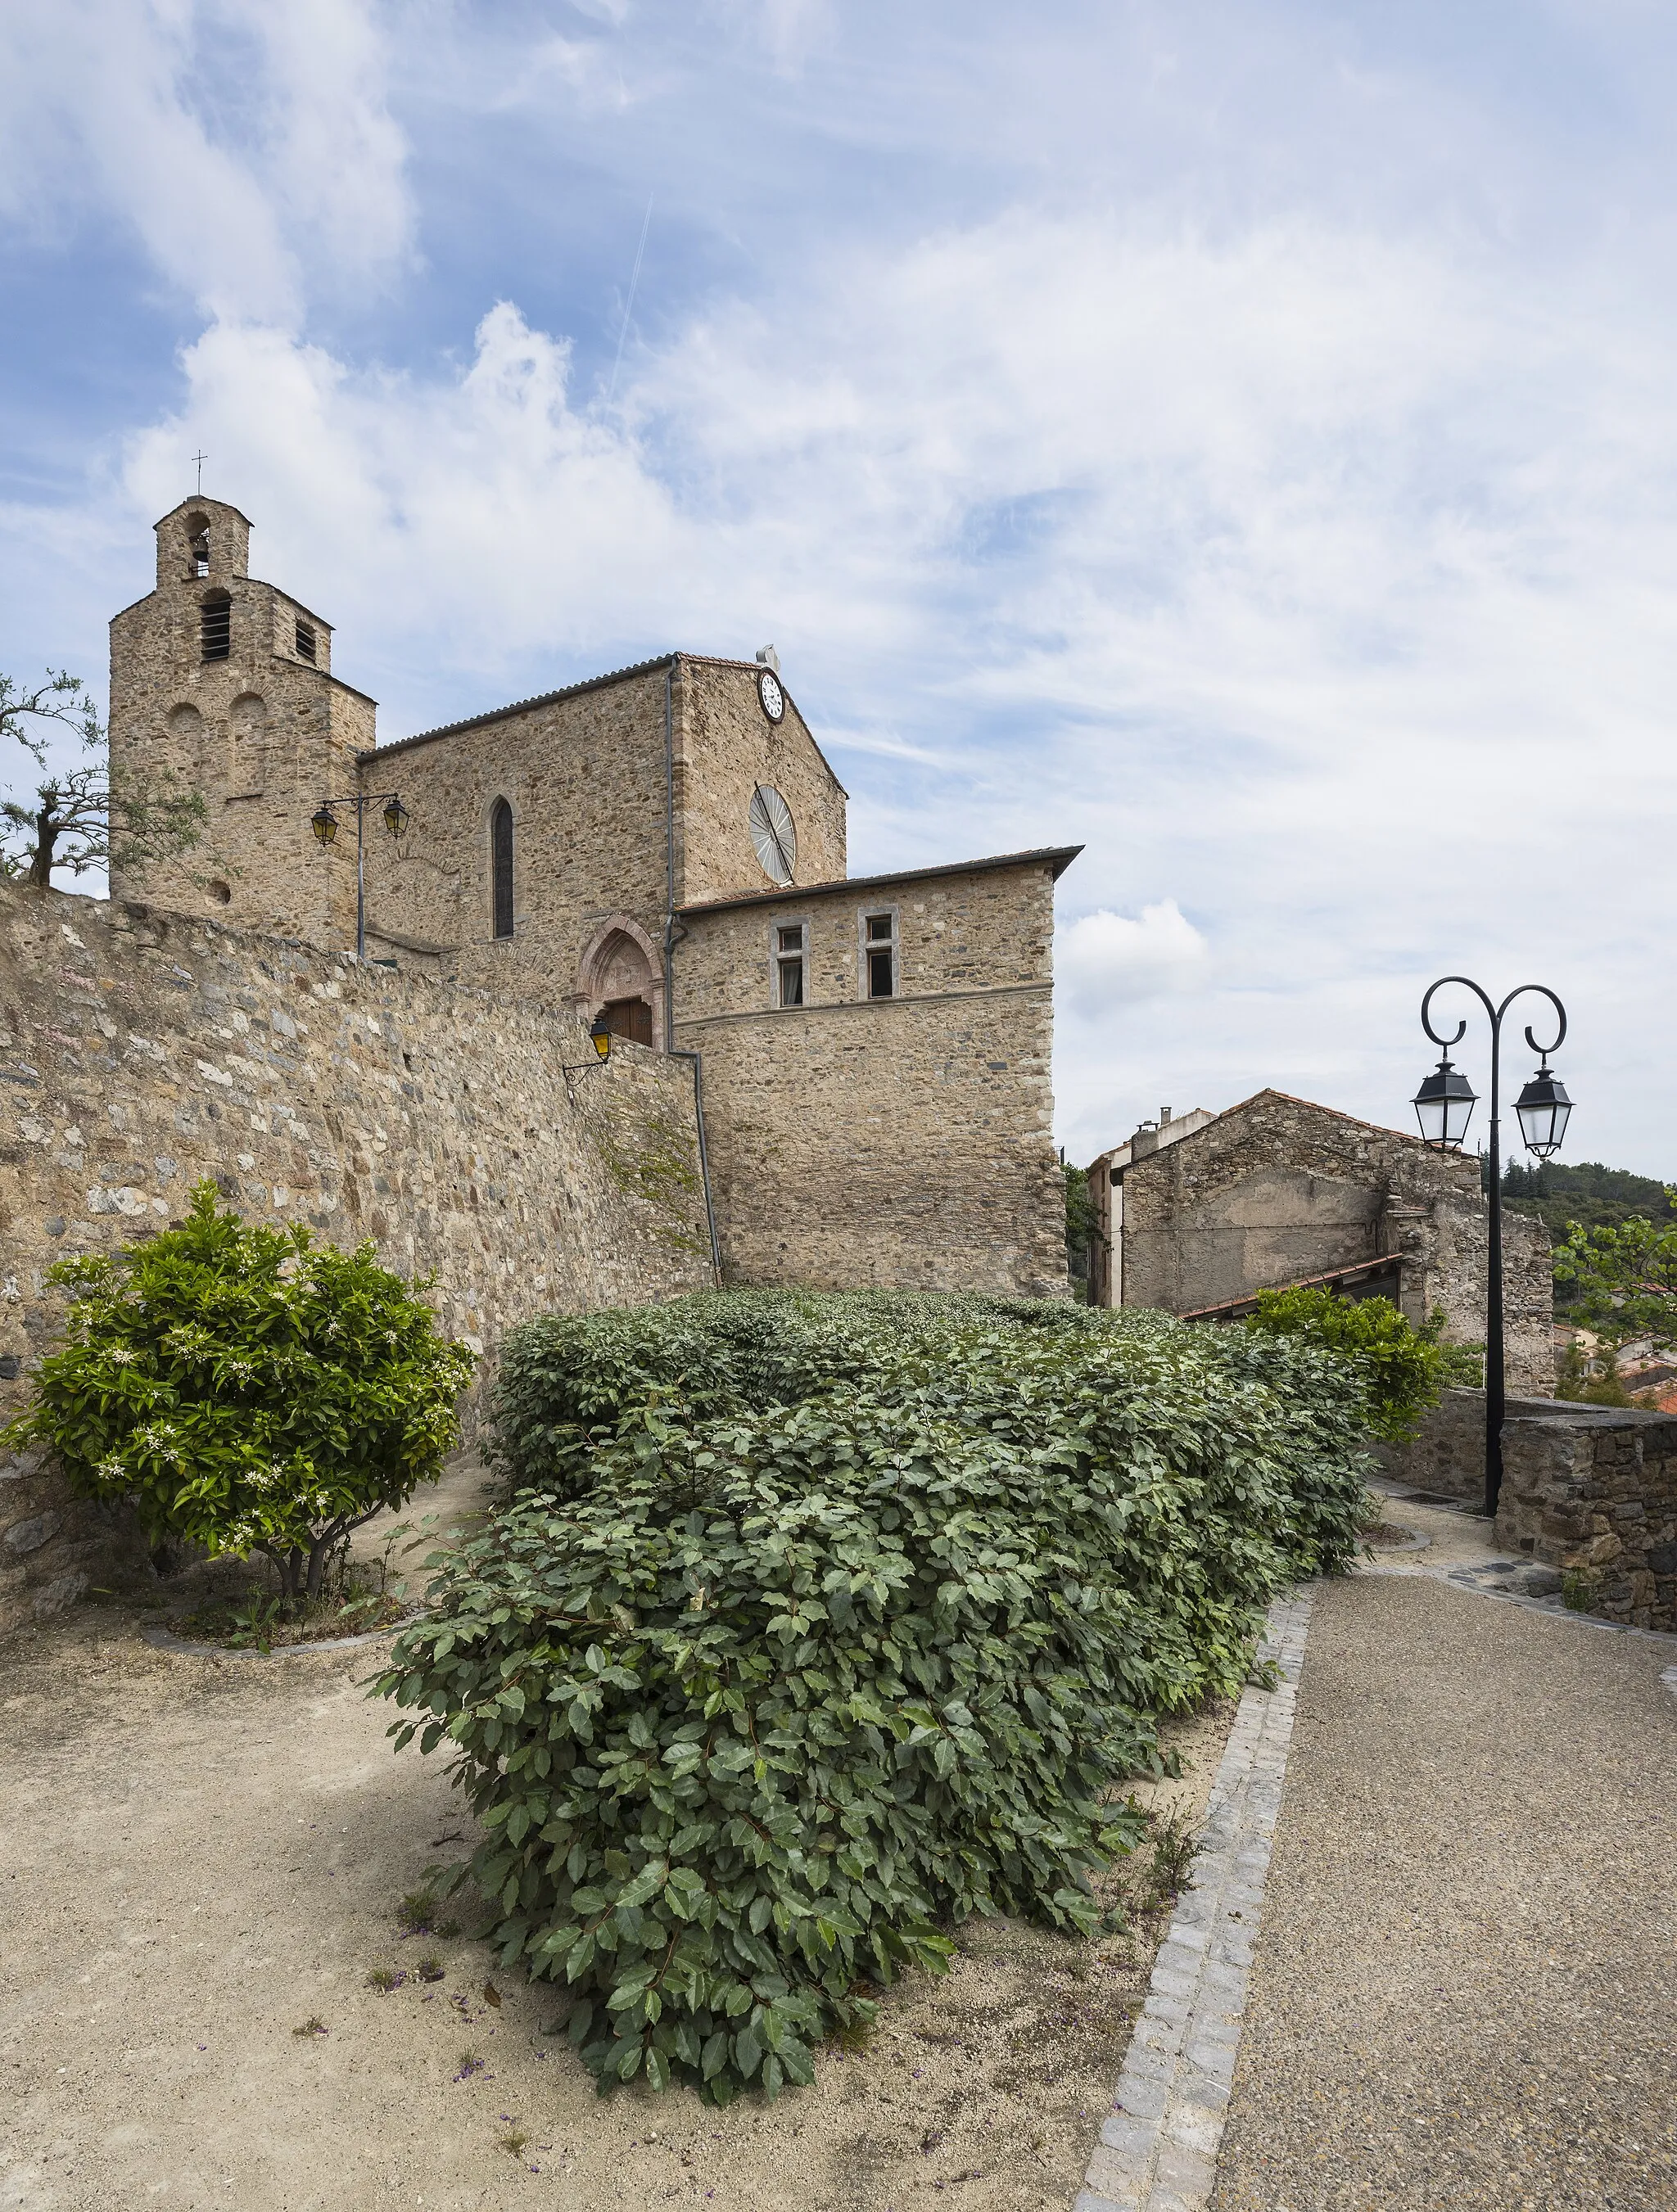 Photo showing: The church of Roquebrun, Hérault, France